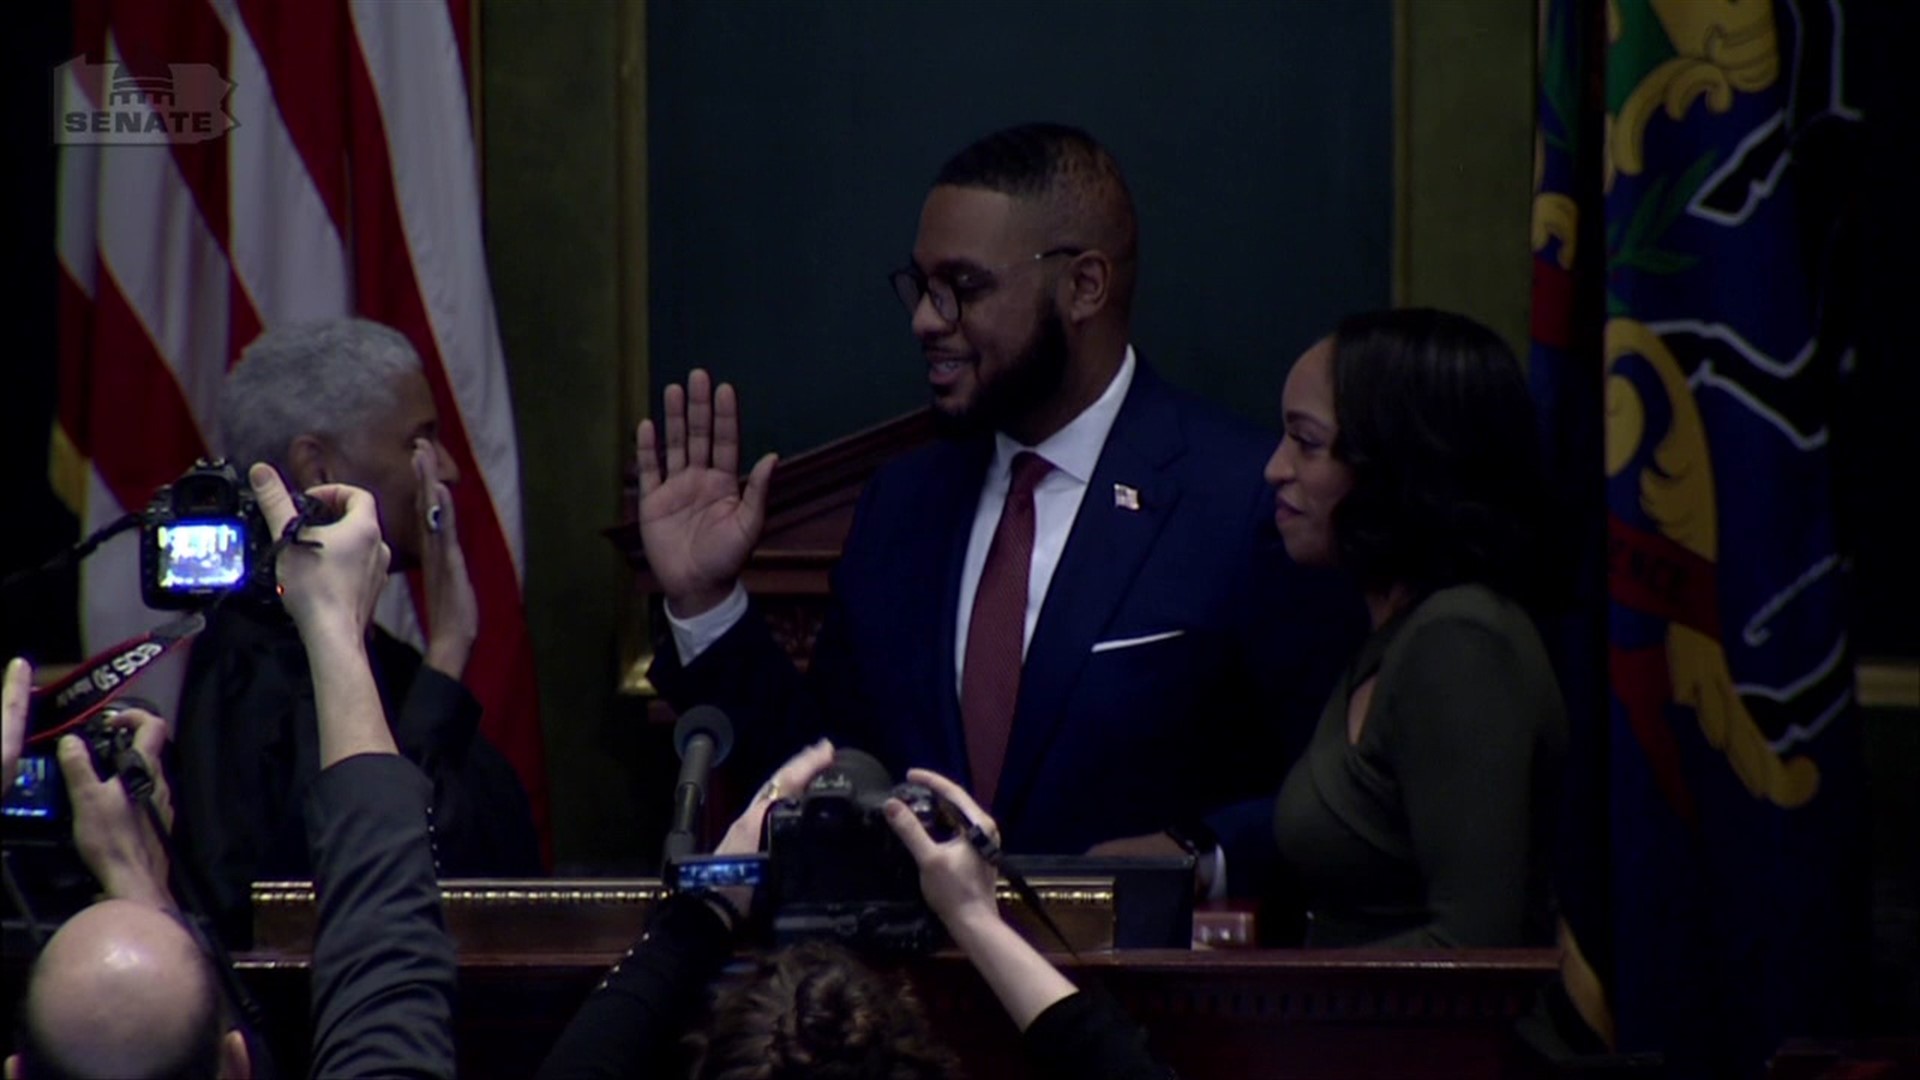 The new Lieutenant Governor is the first African American to be second in command of the Commonwealth.